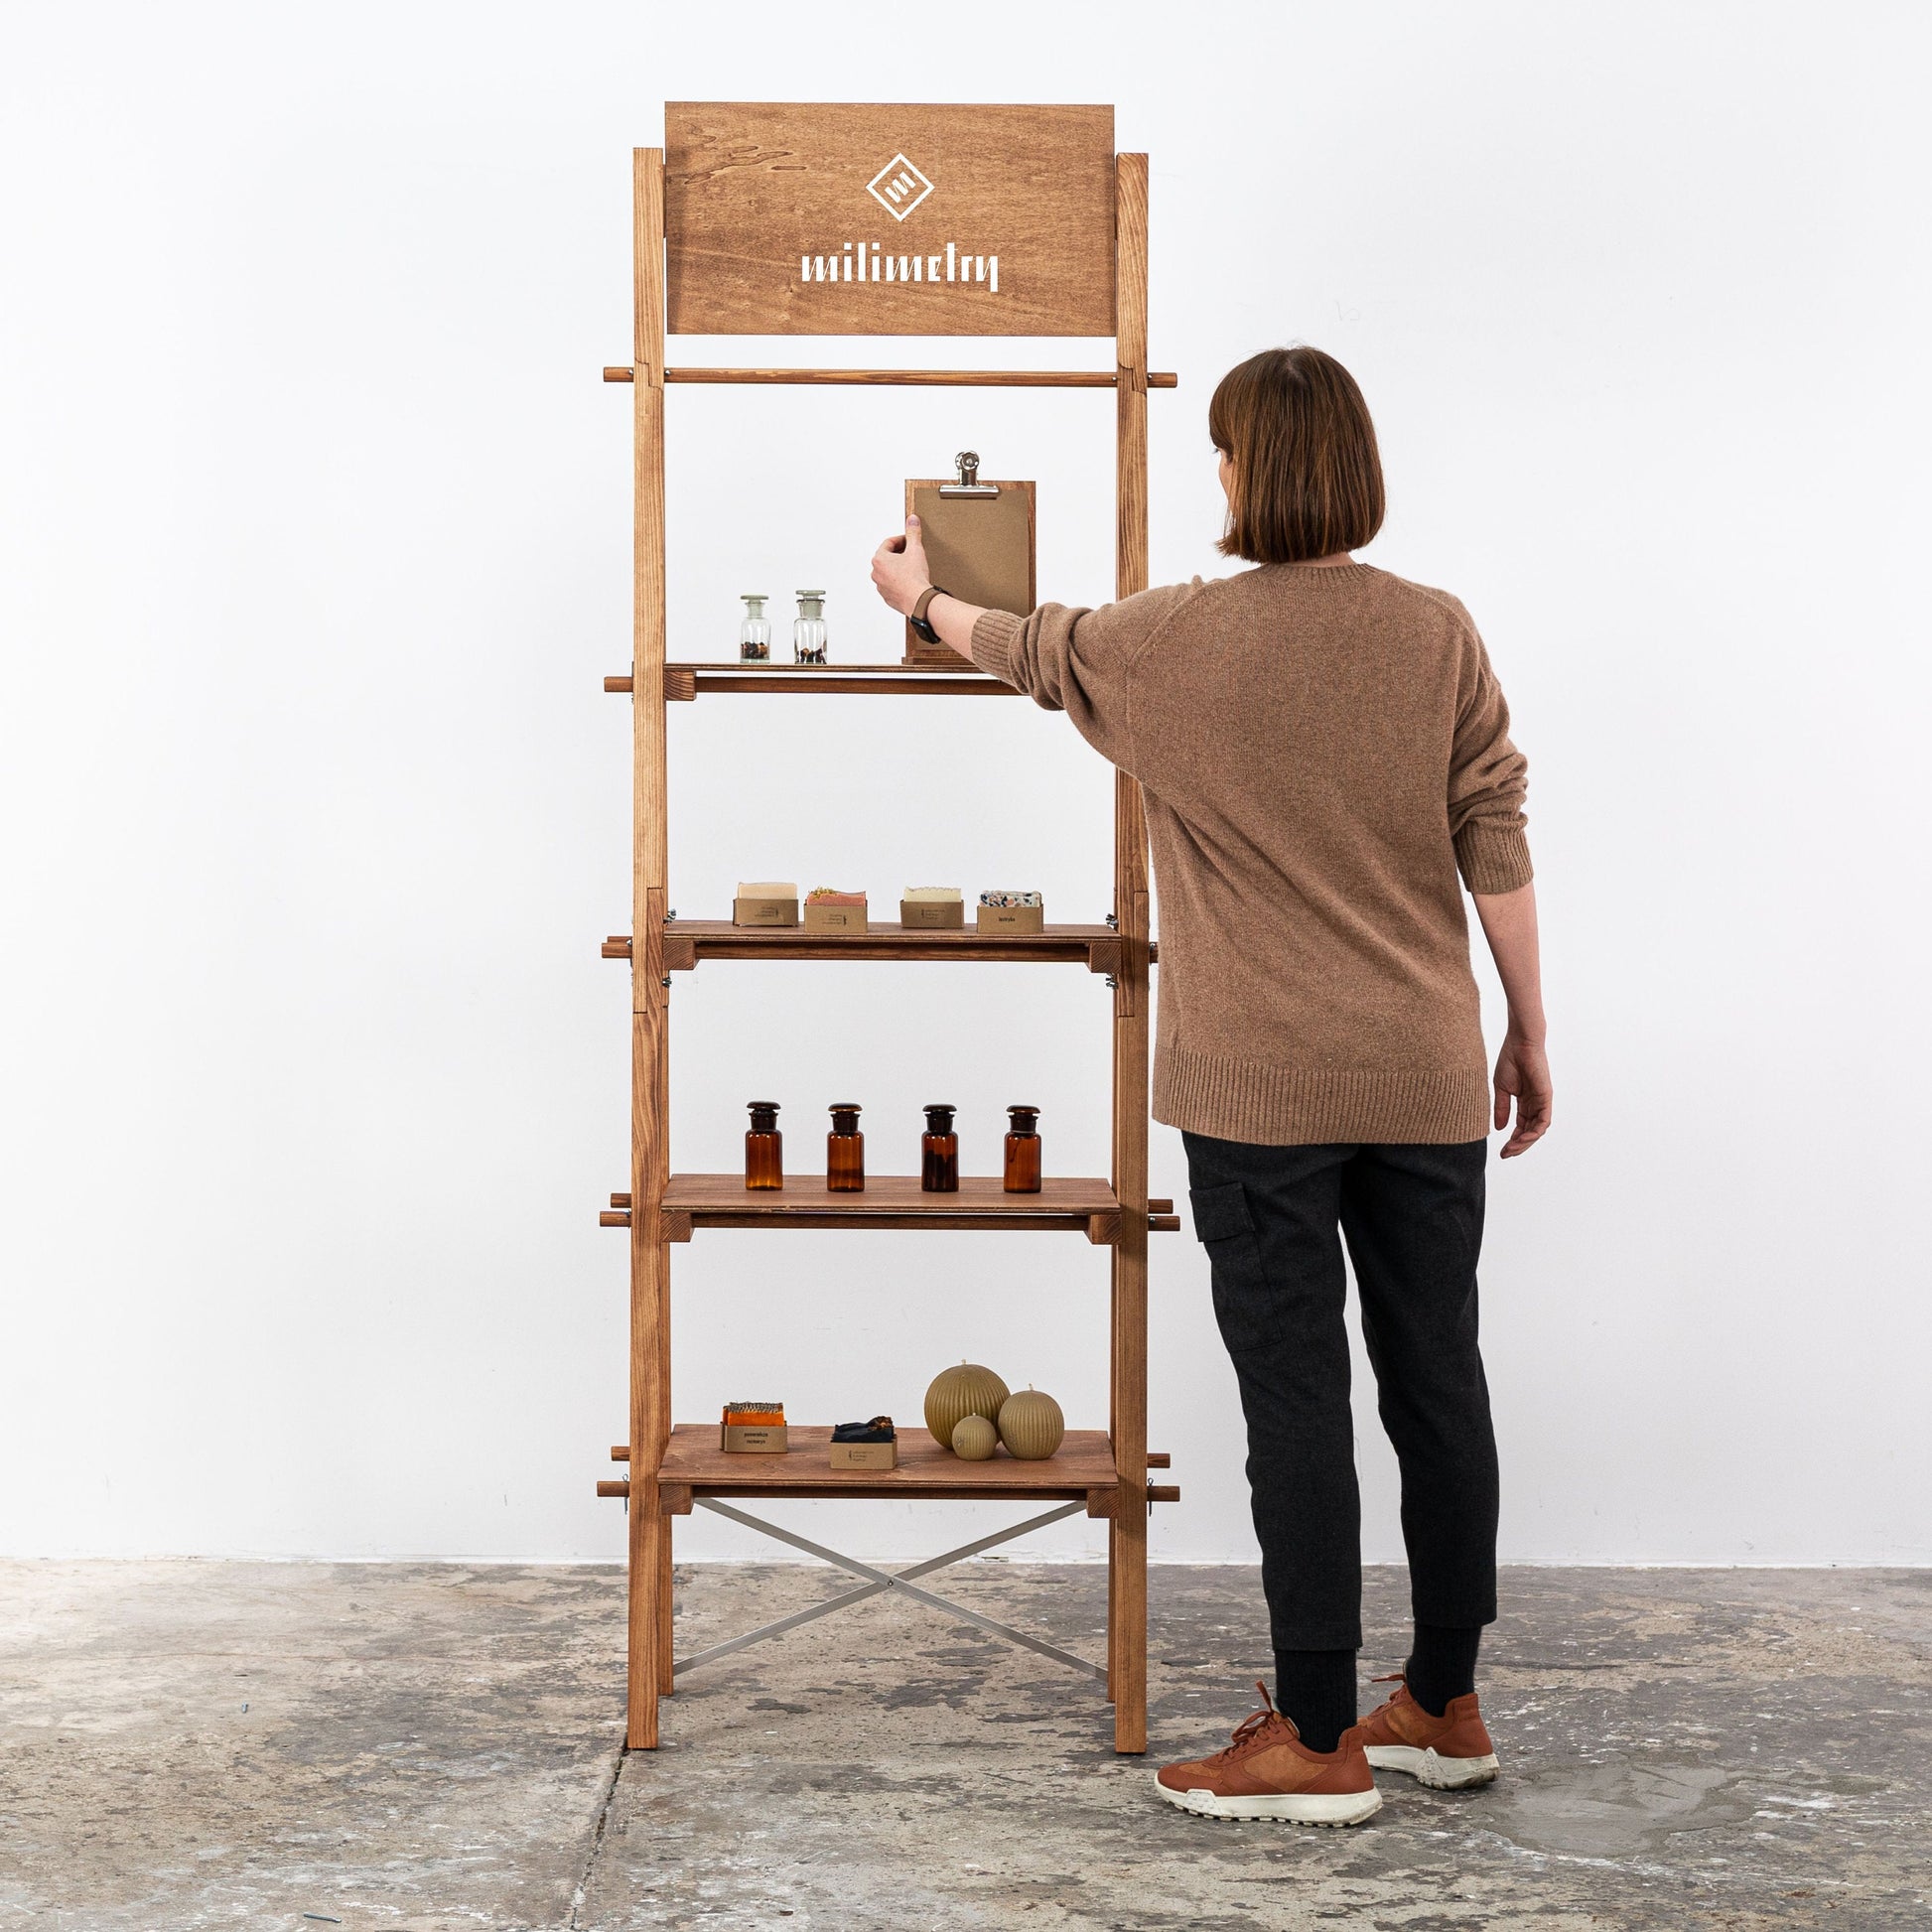 Collapsible retail shelving unit VS-04-CF in coffee stained color, custom logo retail stand, vendor stand, brand corner | Milimetry